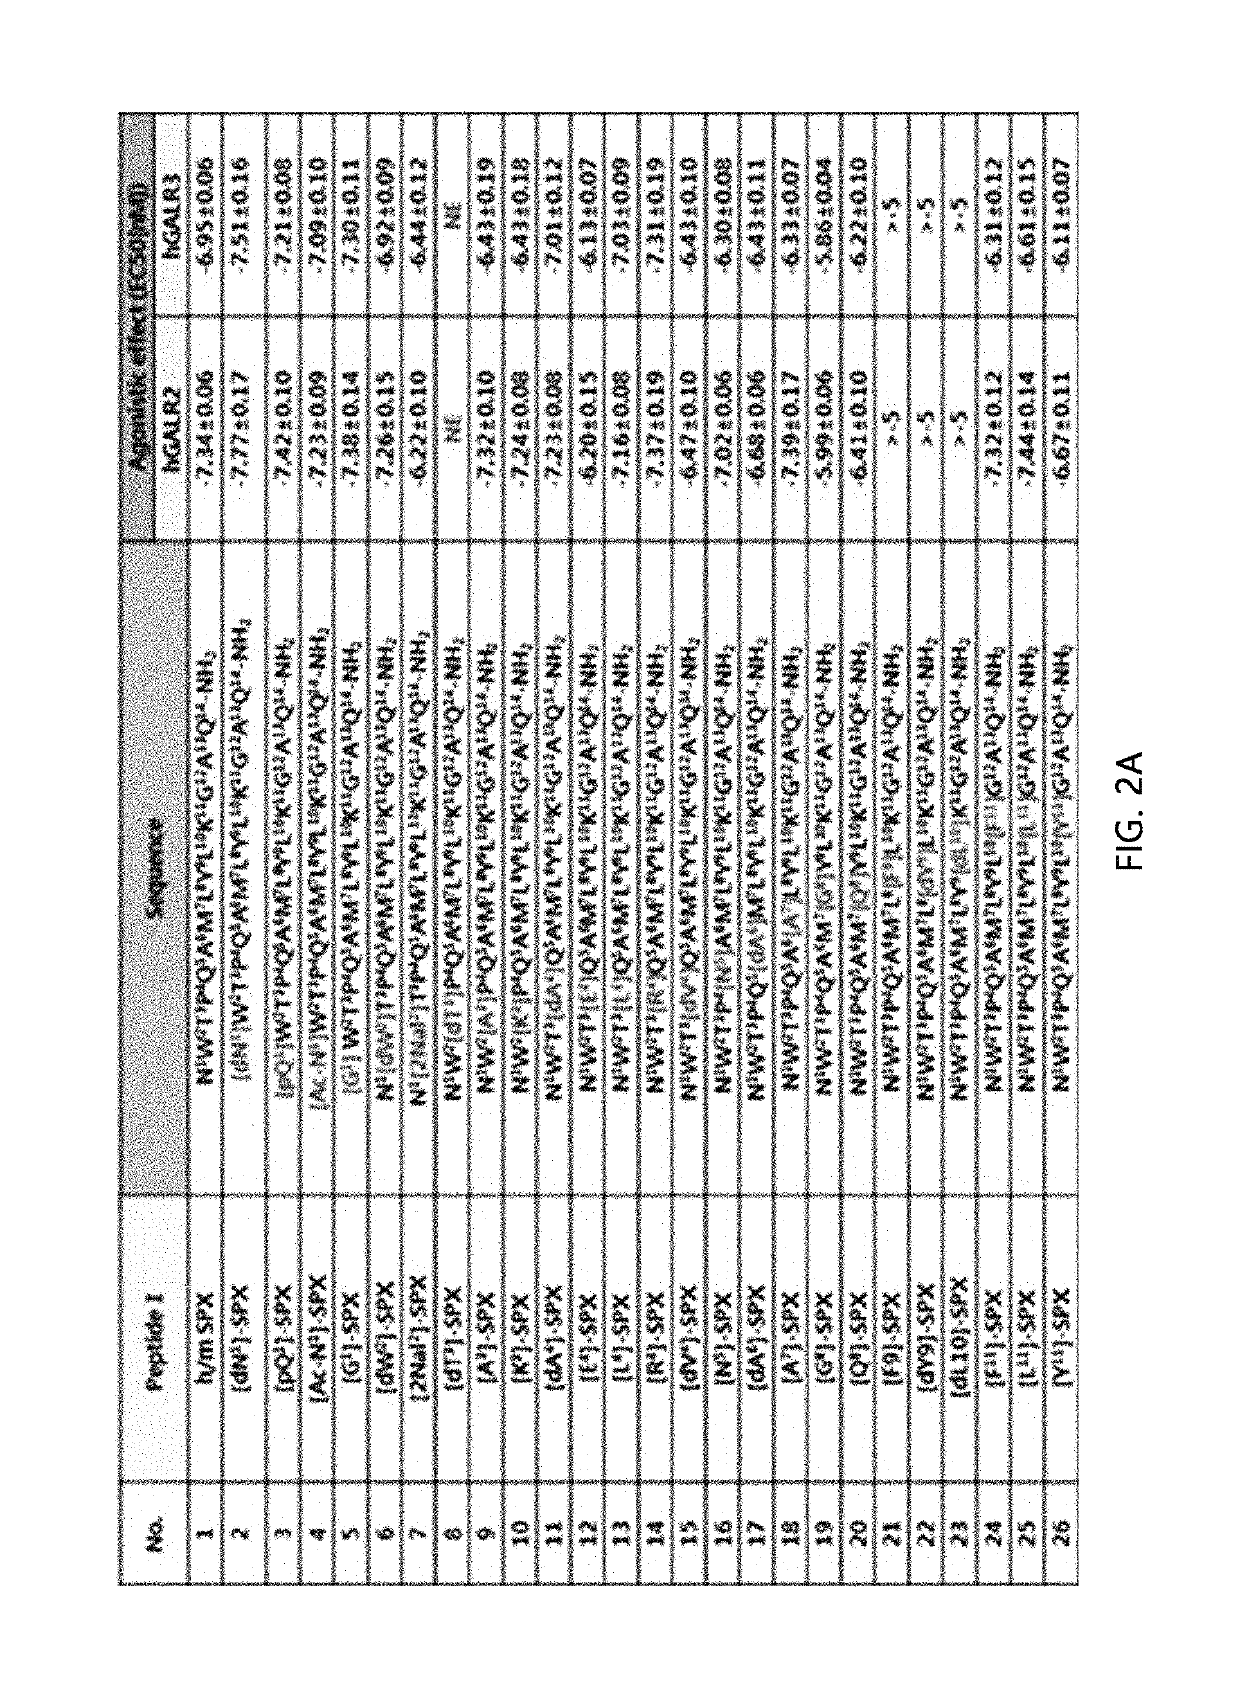 Agonist of spexin-based galanin type 2 receptor and use thereof